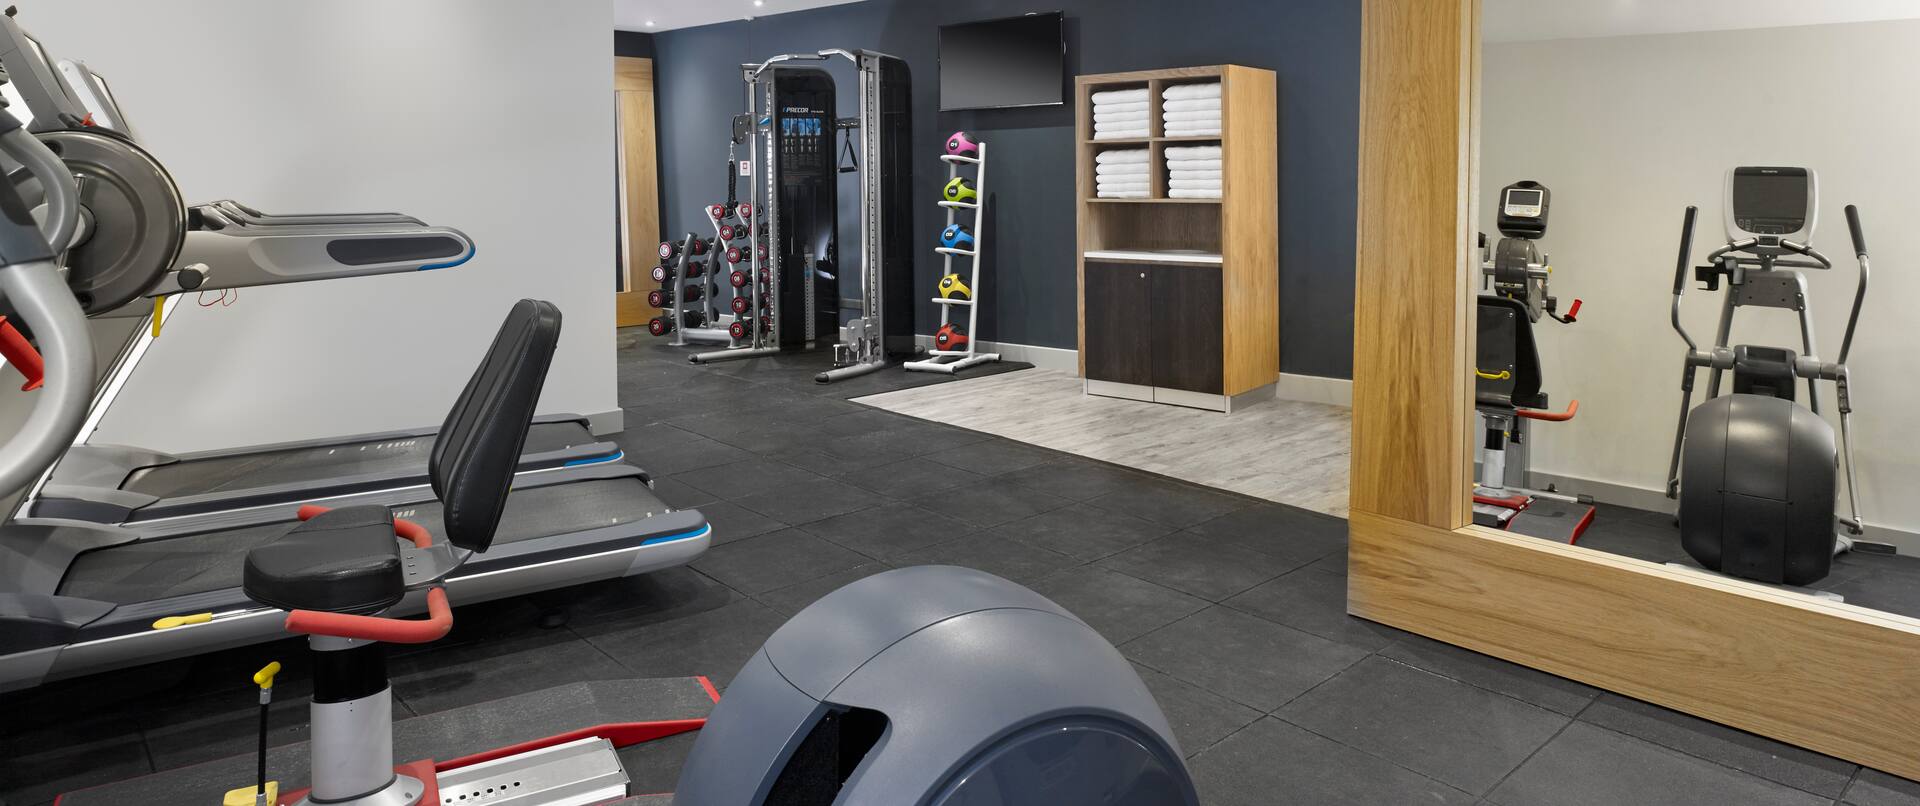 Large Mirror, Cardio Equipment, TOwel Station TV, Weight Balls, and Weight Machine in Fitness Suite